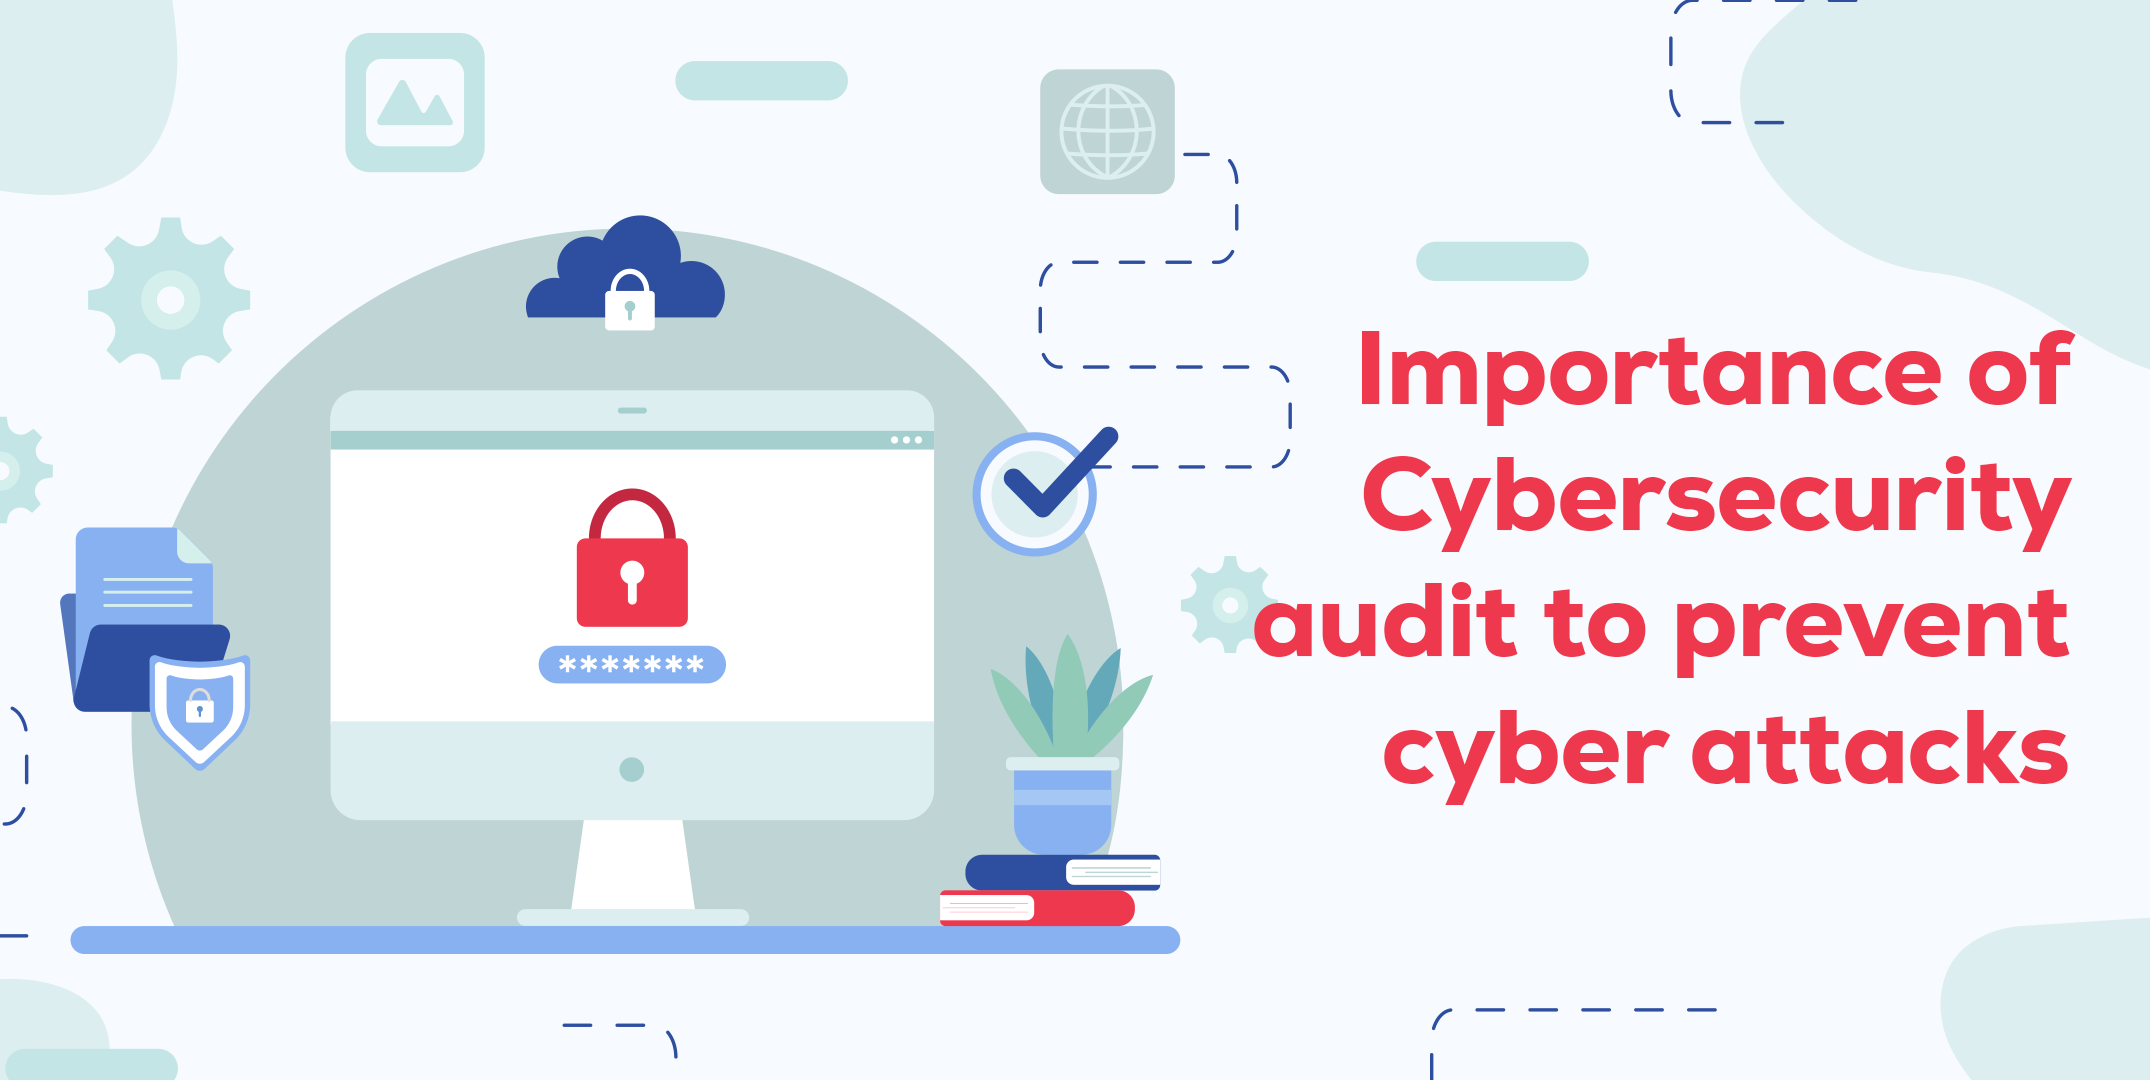 Importance of Cybersecurity audit to prevent cyber attacks